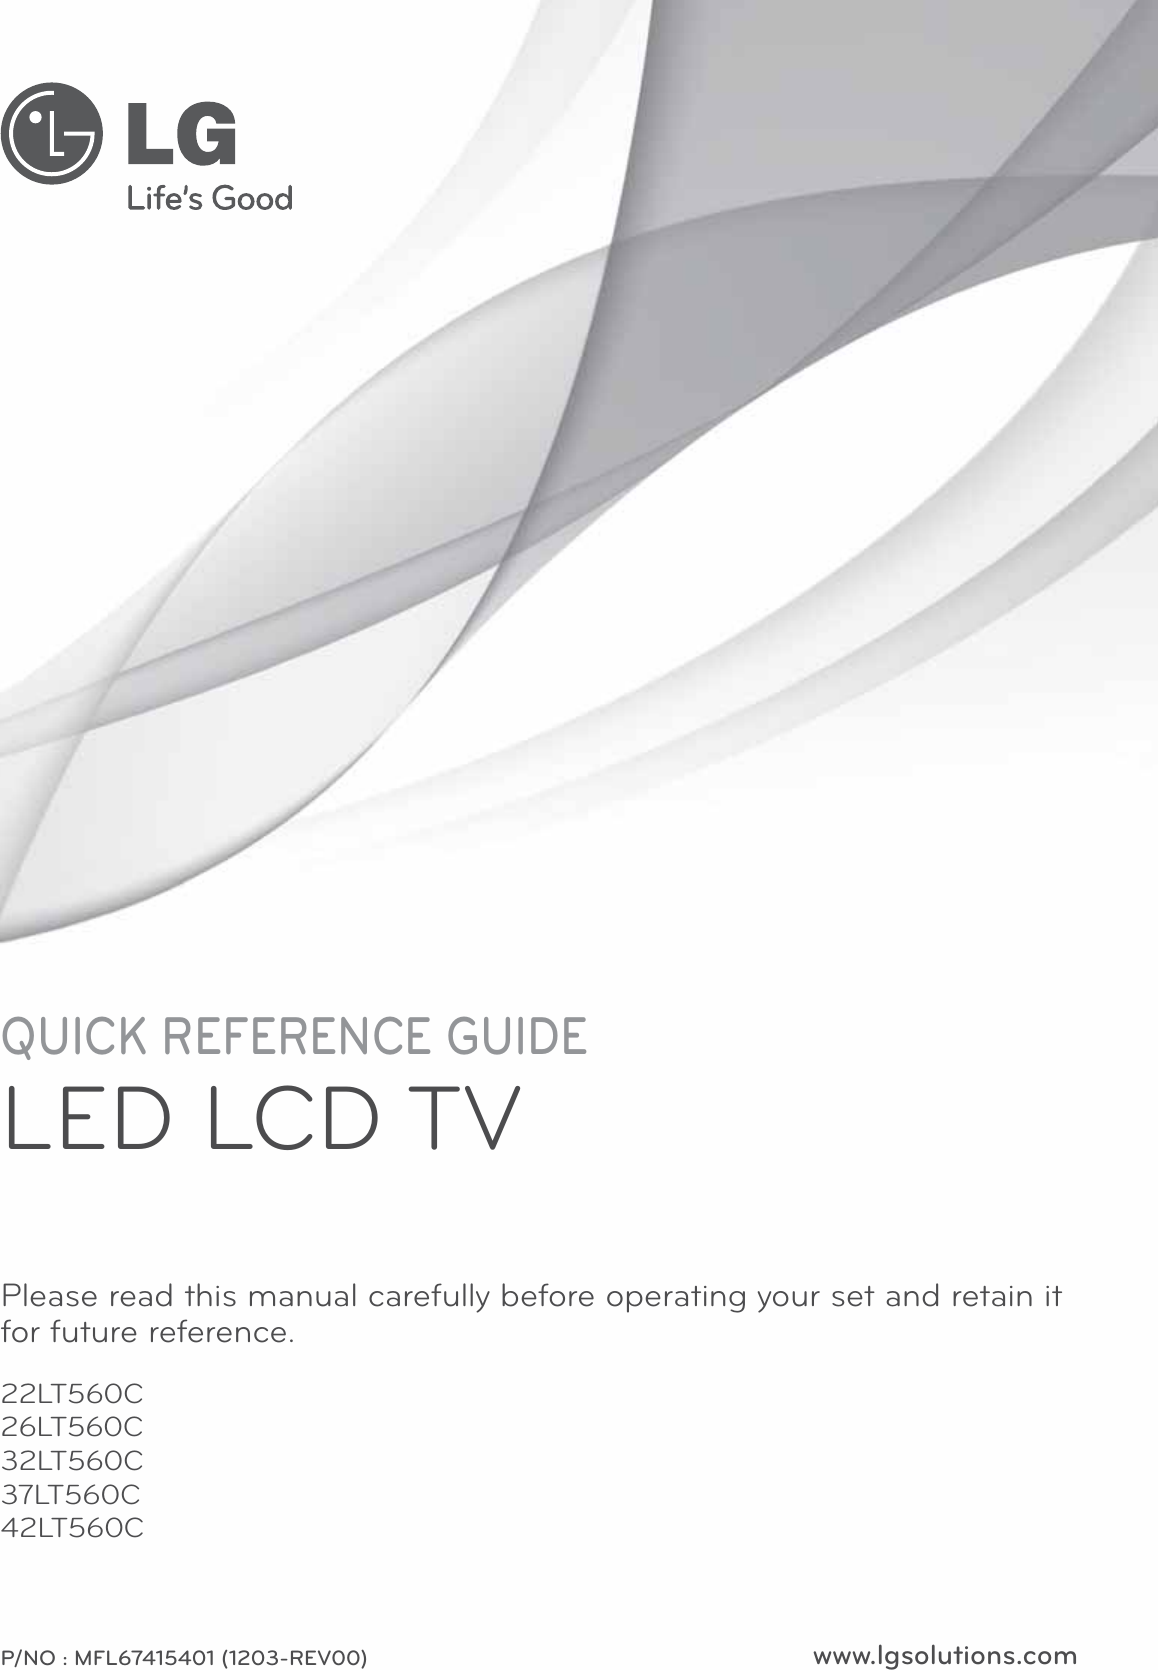 www.lgsolutions.comQUICK REFERENCE GUIDELED LCD TVPlease read this manual carefully before operating your set and retain it for future reference.P/NO : MFL67415401 (1203-REV00)22LT560C26LT560C32LT560C37LT560C42LT560C